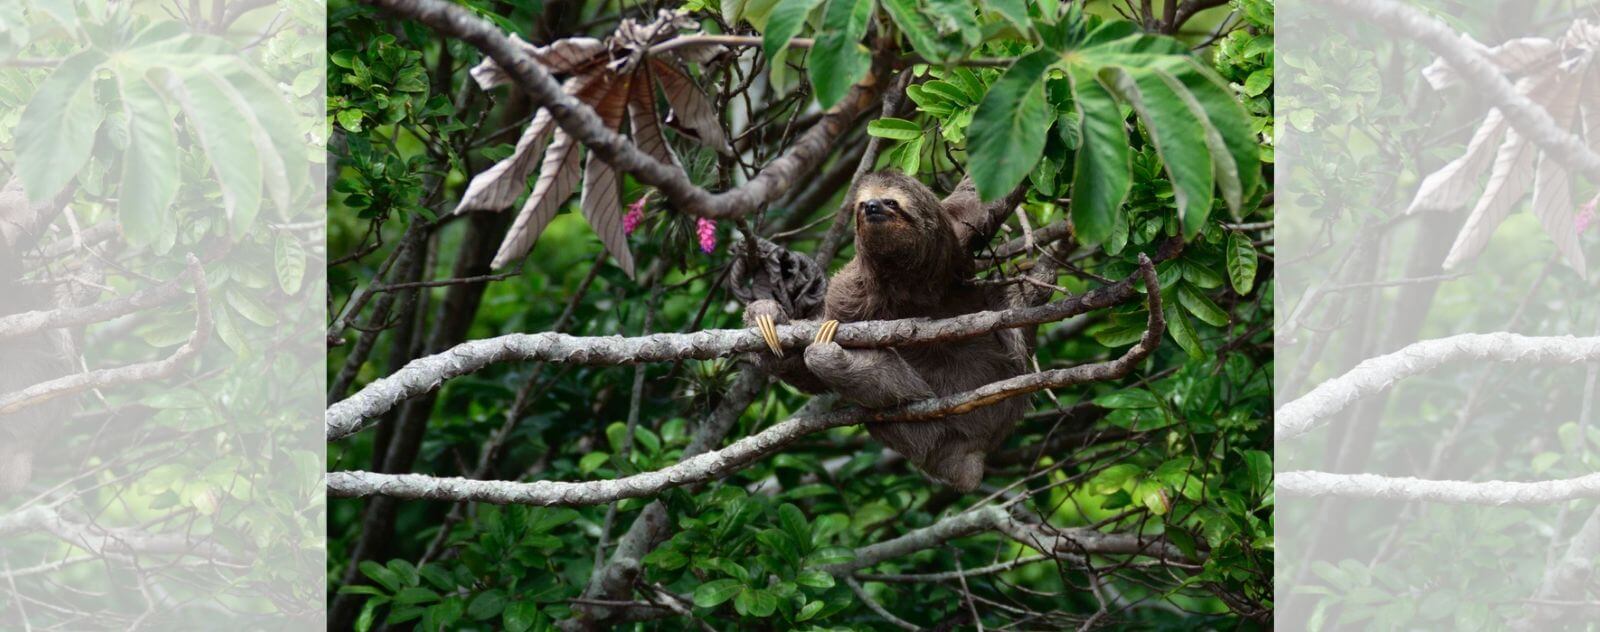 Sloth under Leaves in a Tree